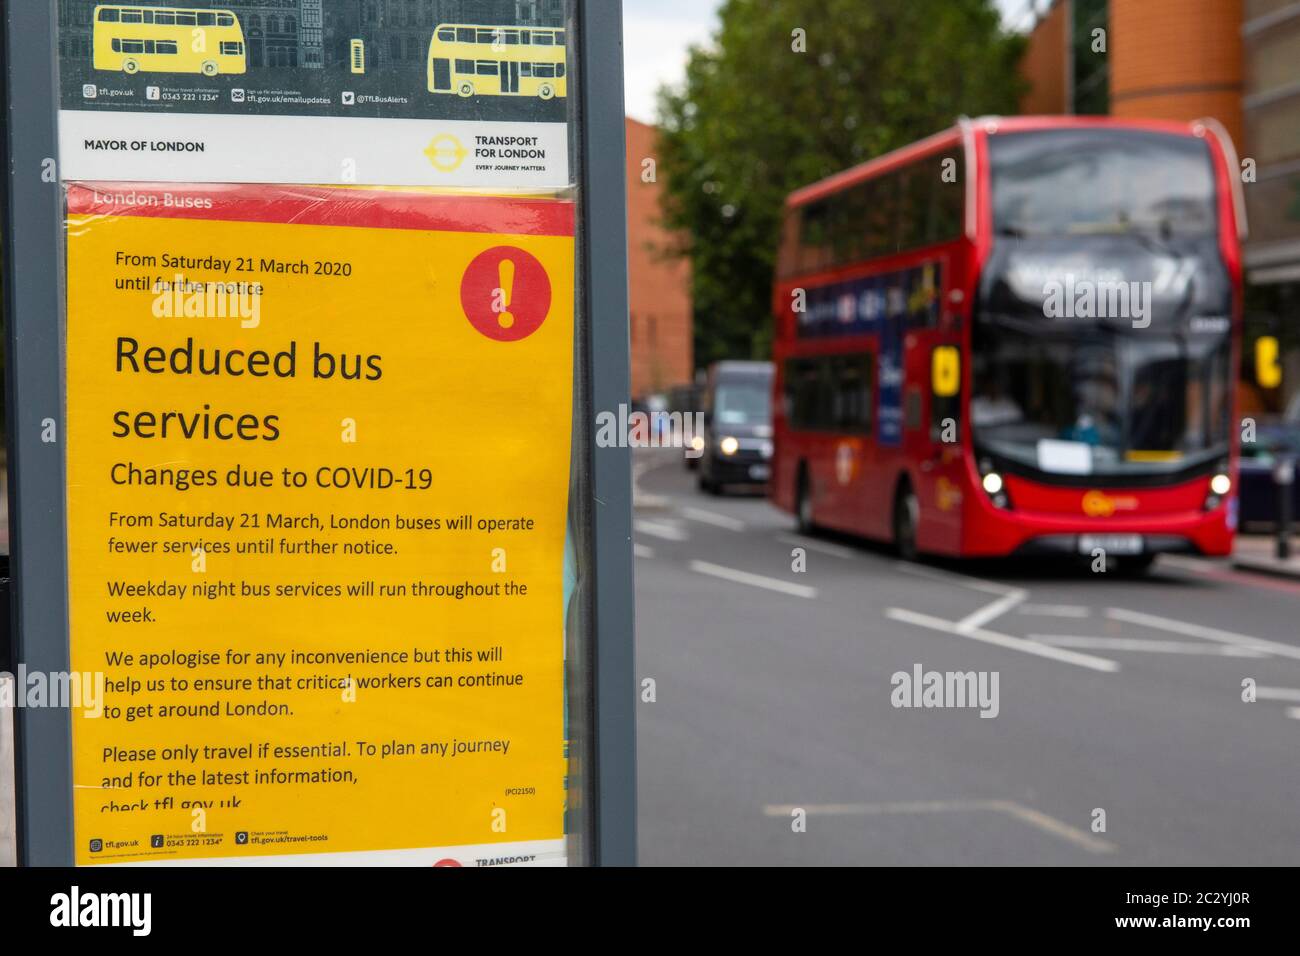 London, UK - June 17th 2020: A sign at a bus stop in South London, UK, detailing the reduced bus services in London during the Coronavirus pandemic. Stock Photo